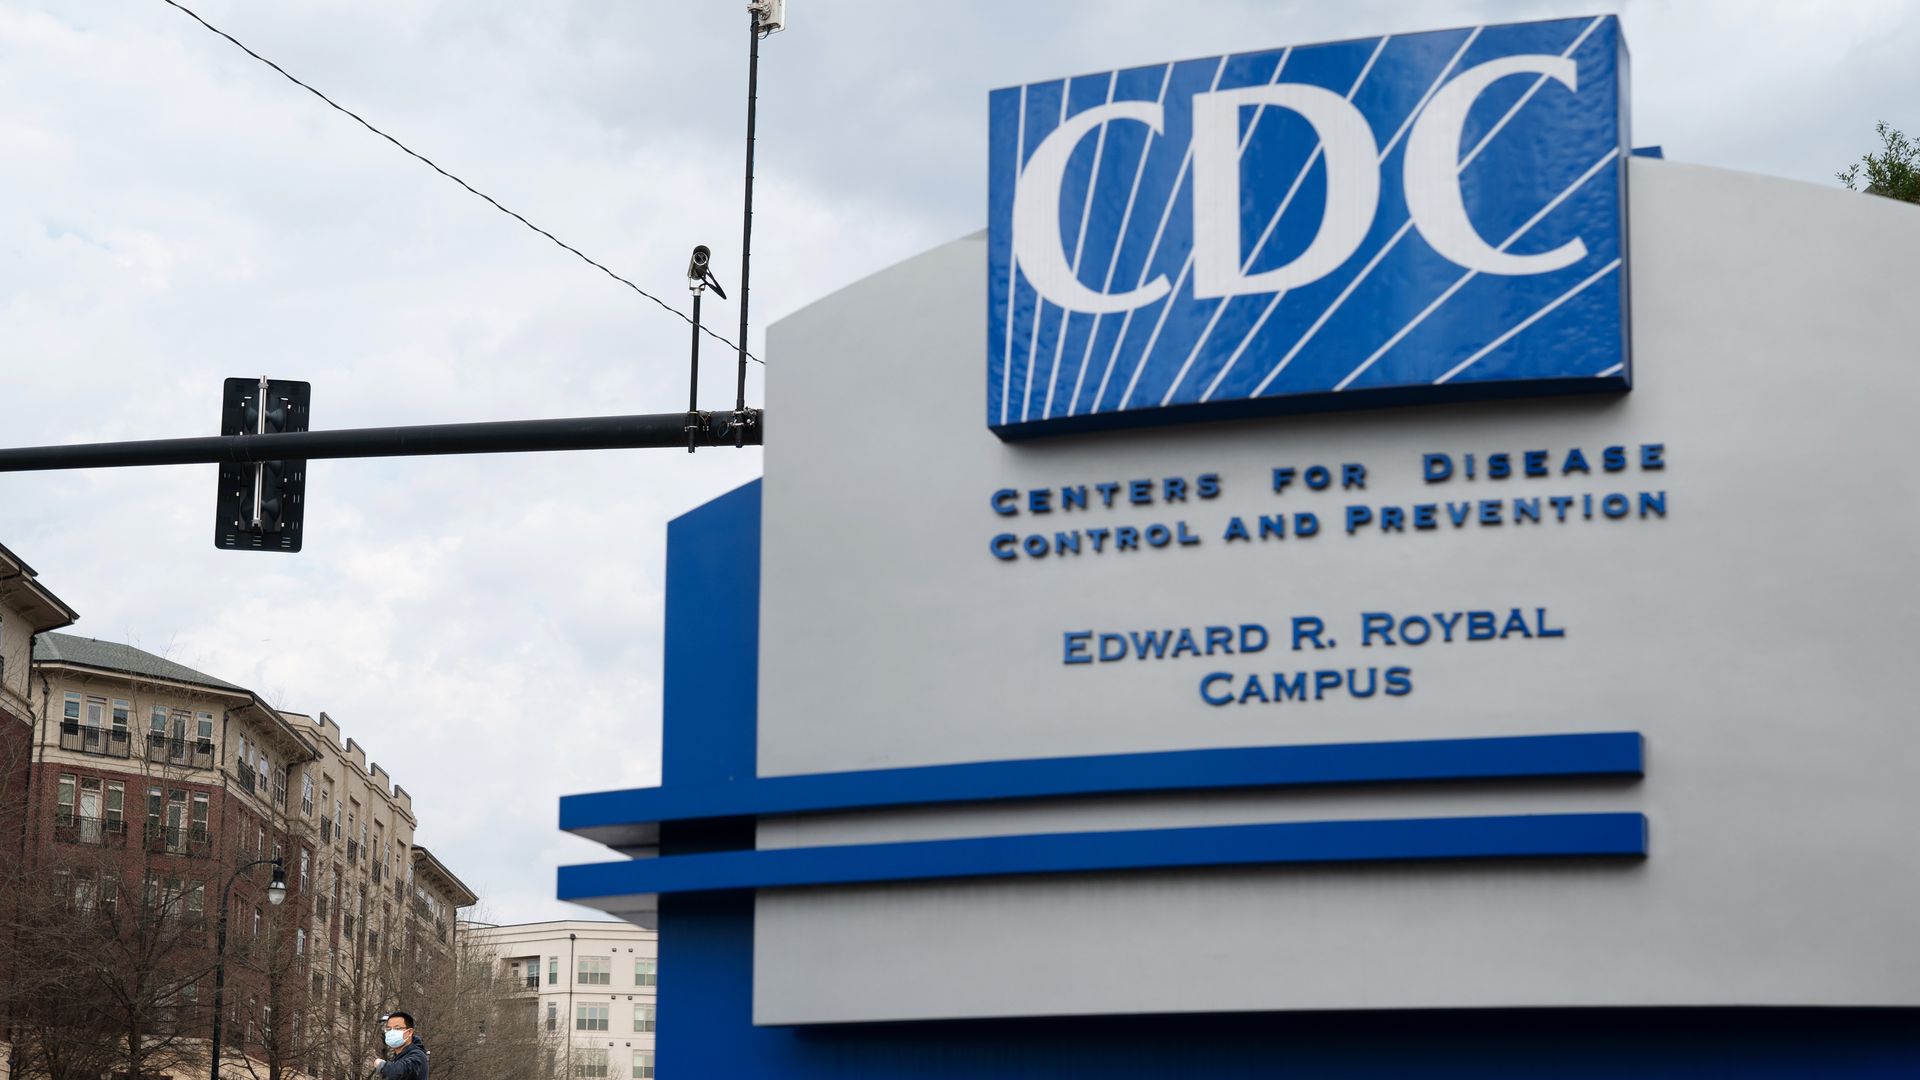  the Centers for Disease Control and Prevention (CDC) headquarters